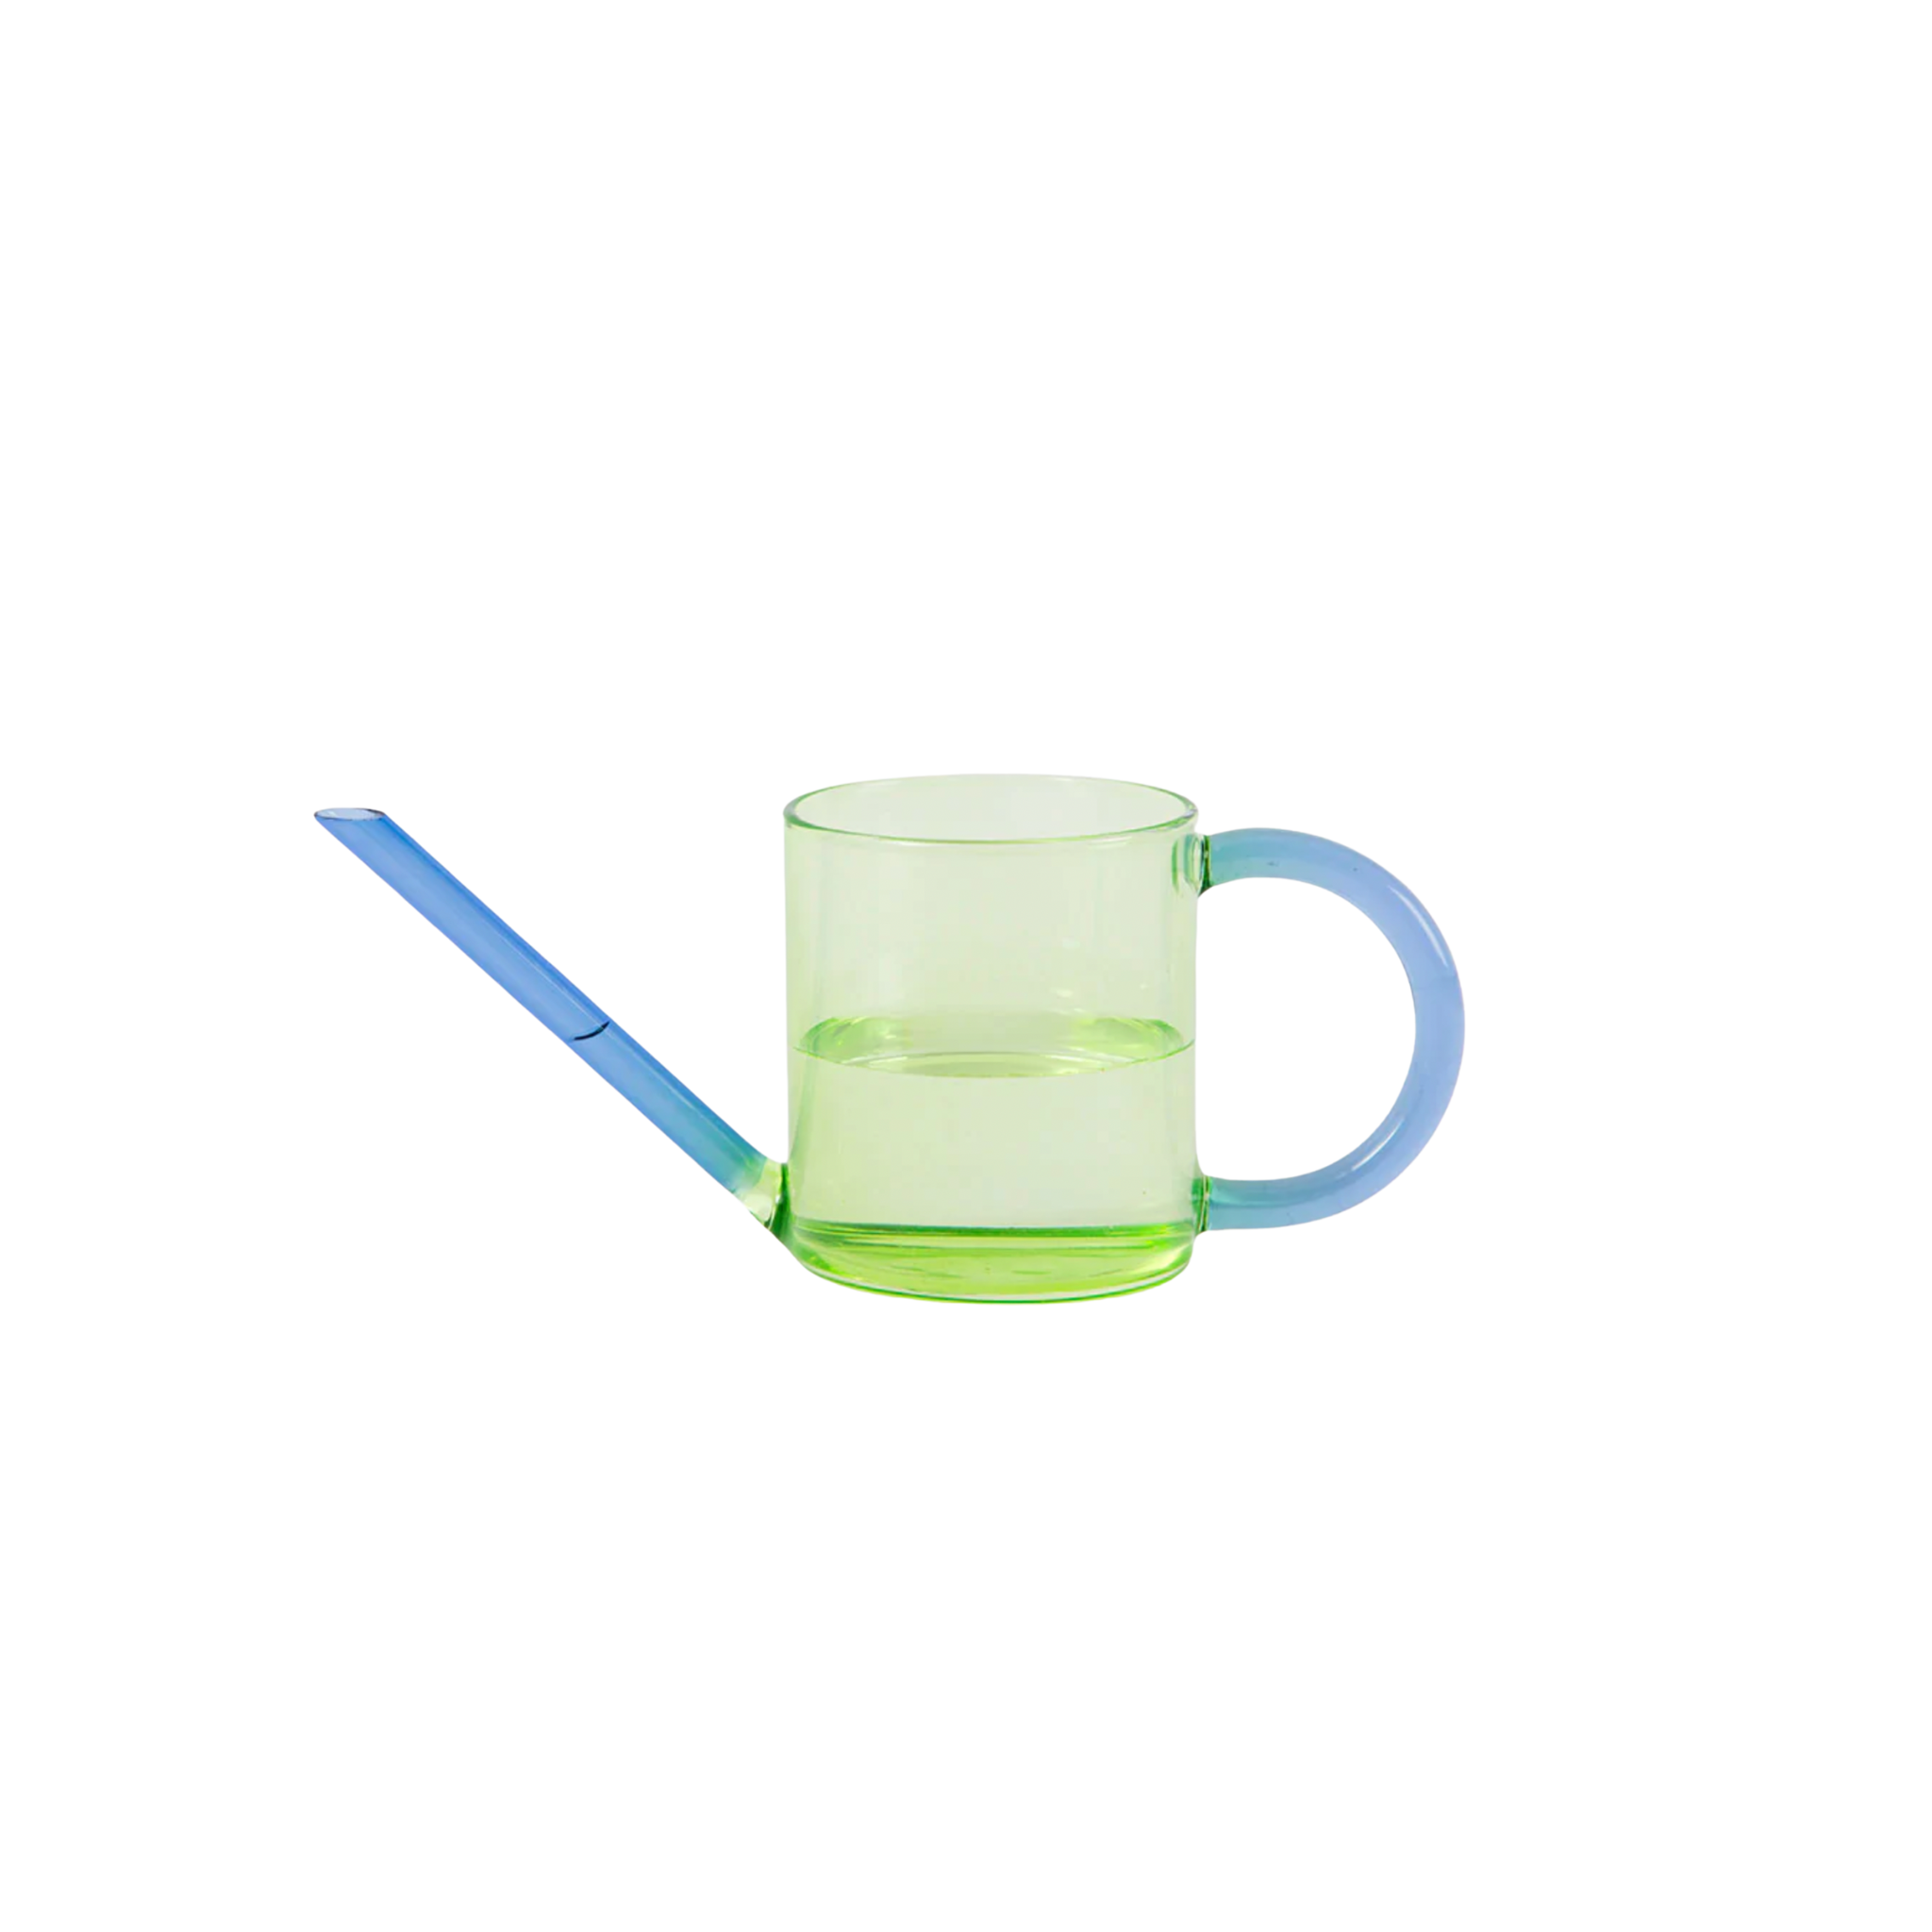 Glass Watering Can